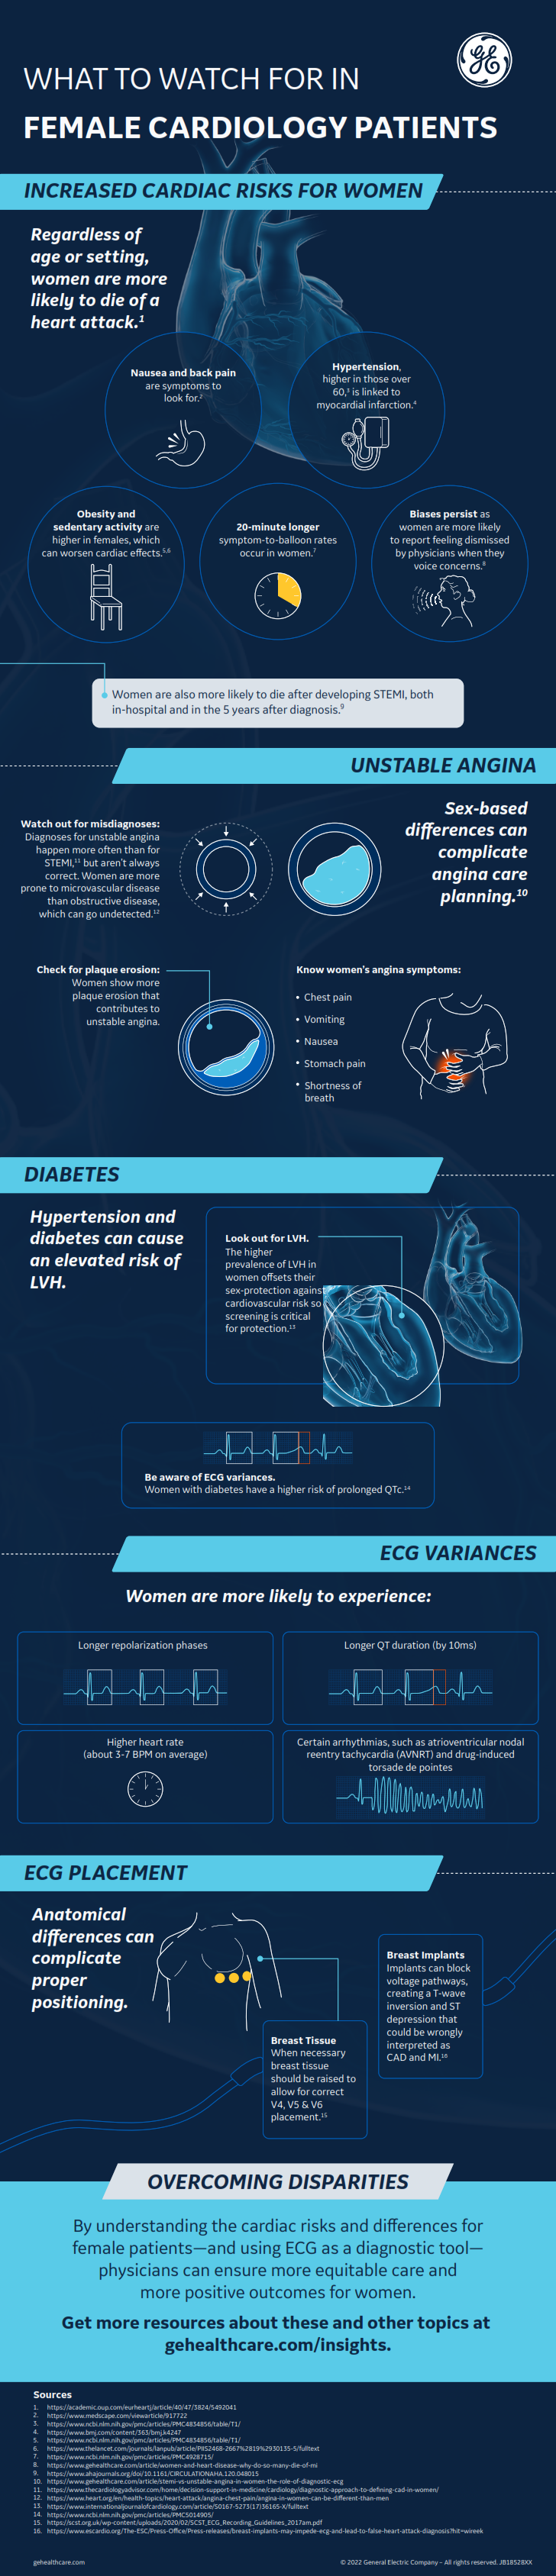 What to watch for in female cardiology patients - Infographic